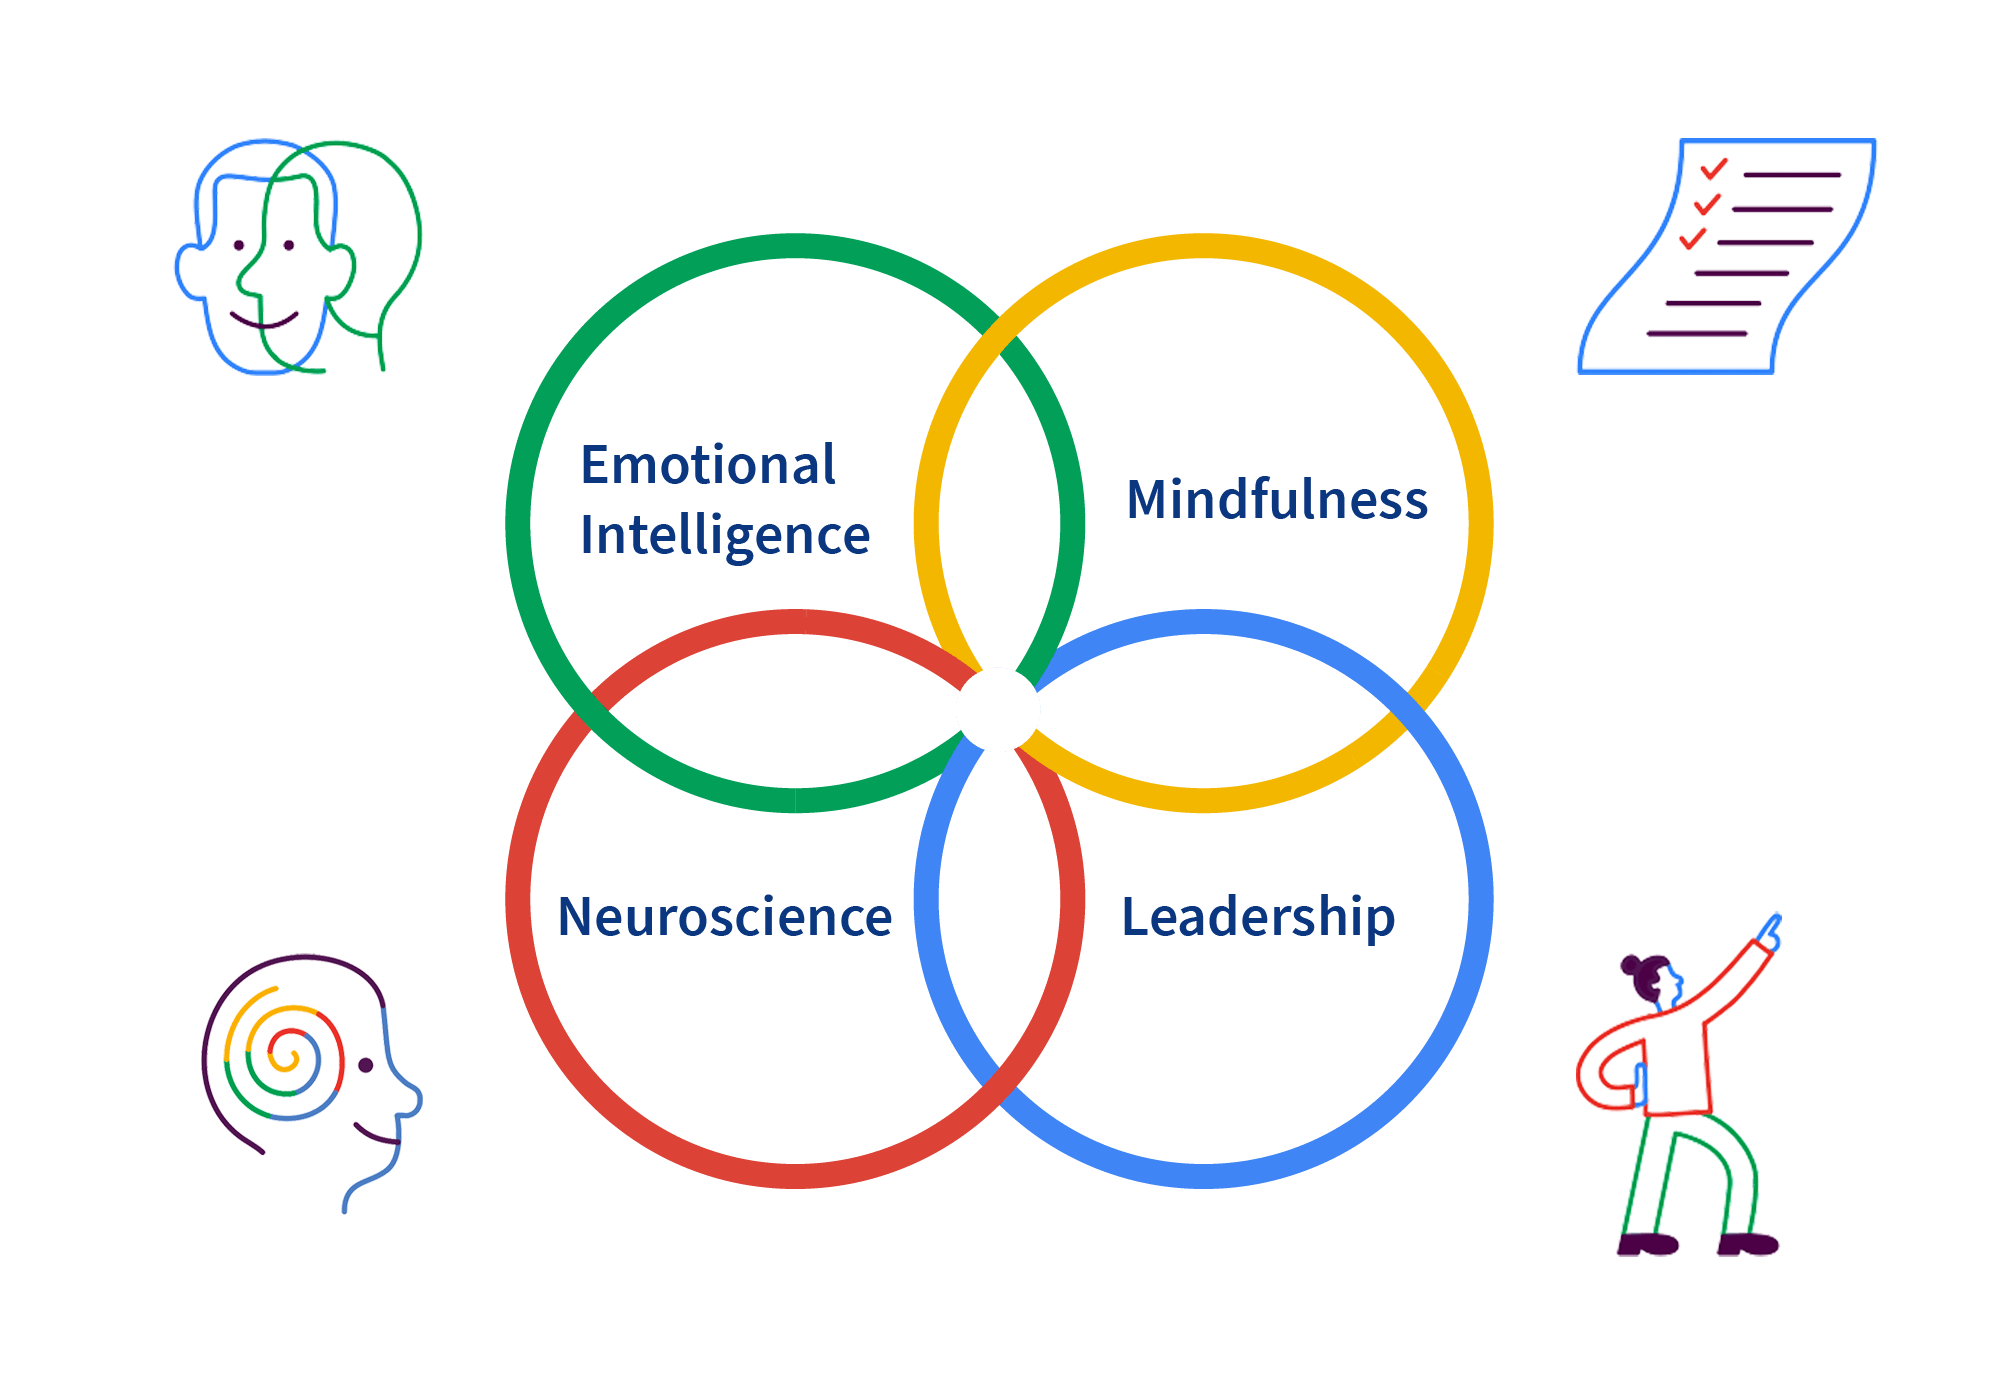 10 Simple Tips for Improving Your Emotional Intelligence and Mindfulness